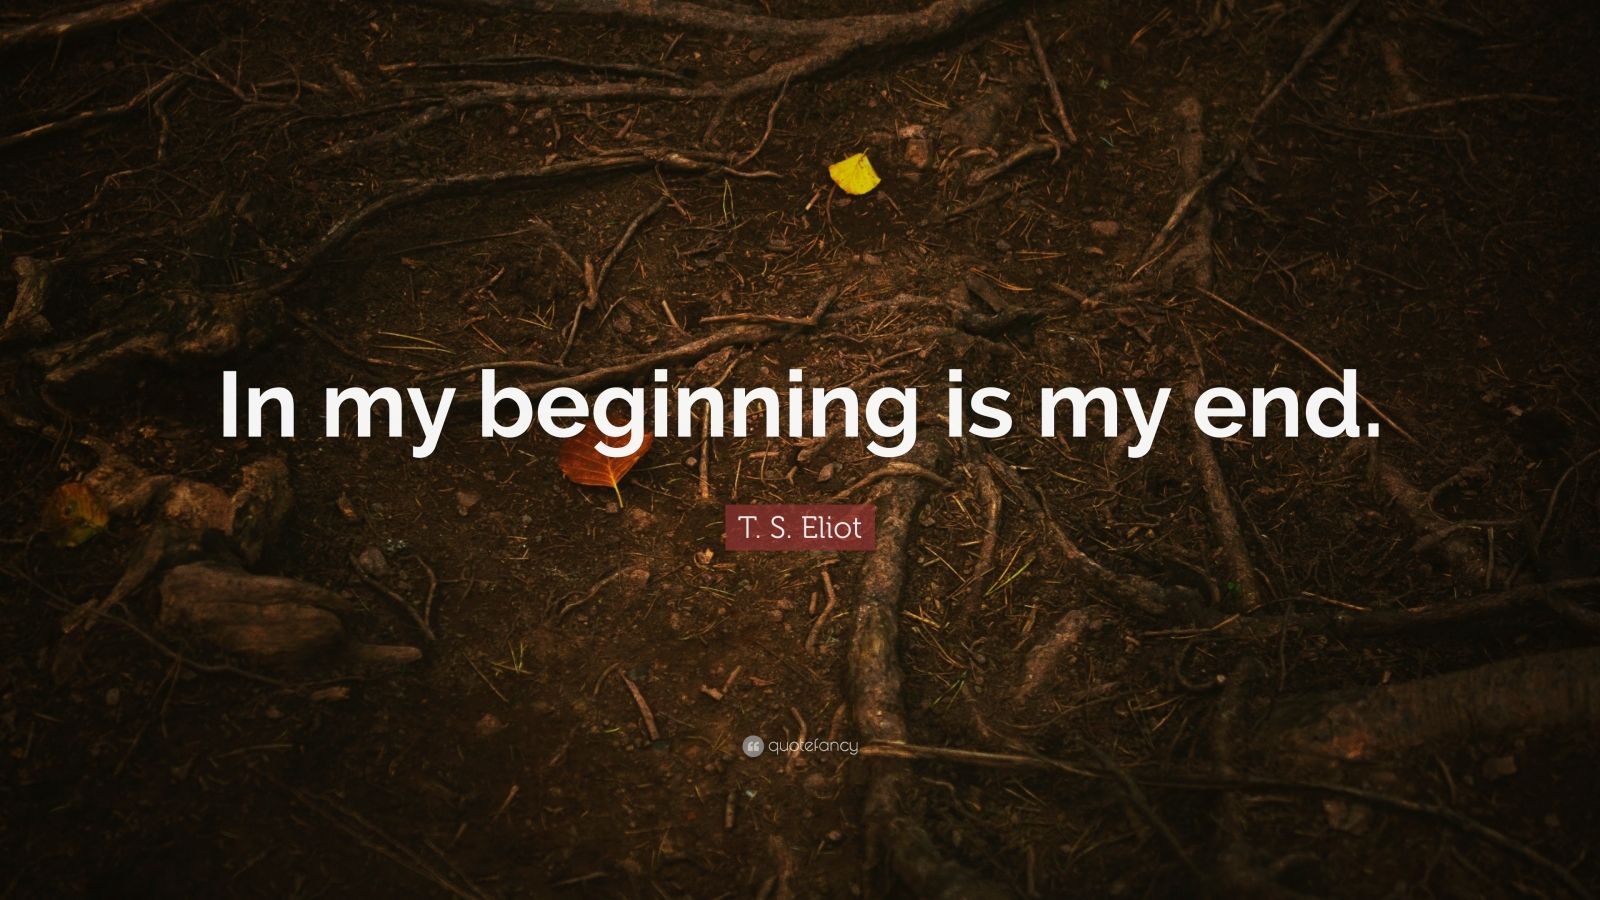 4838677 T S Eliot Quote In my beginning is my end